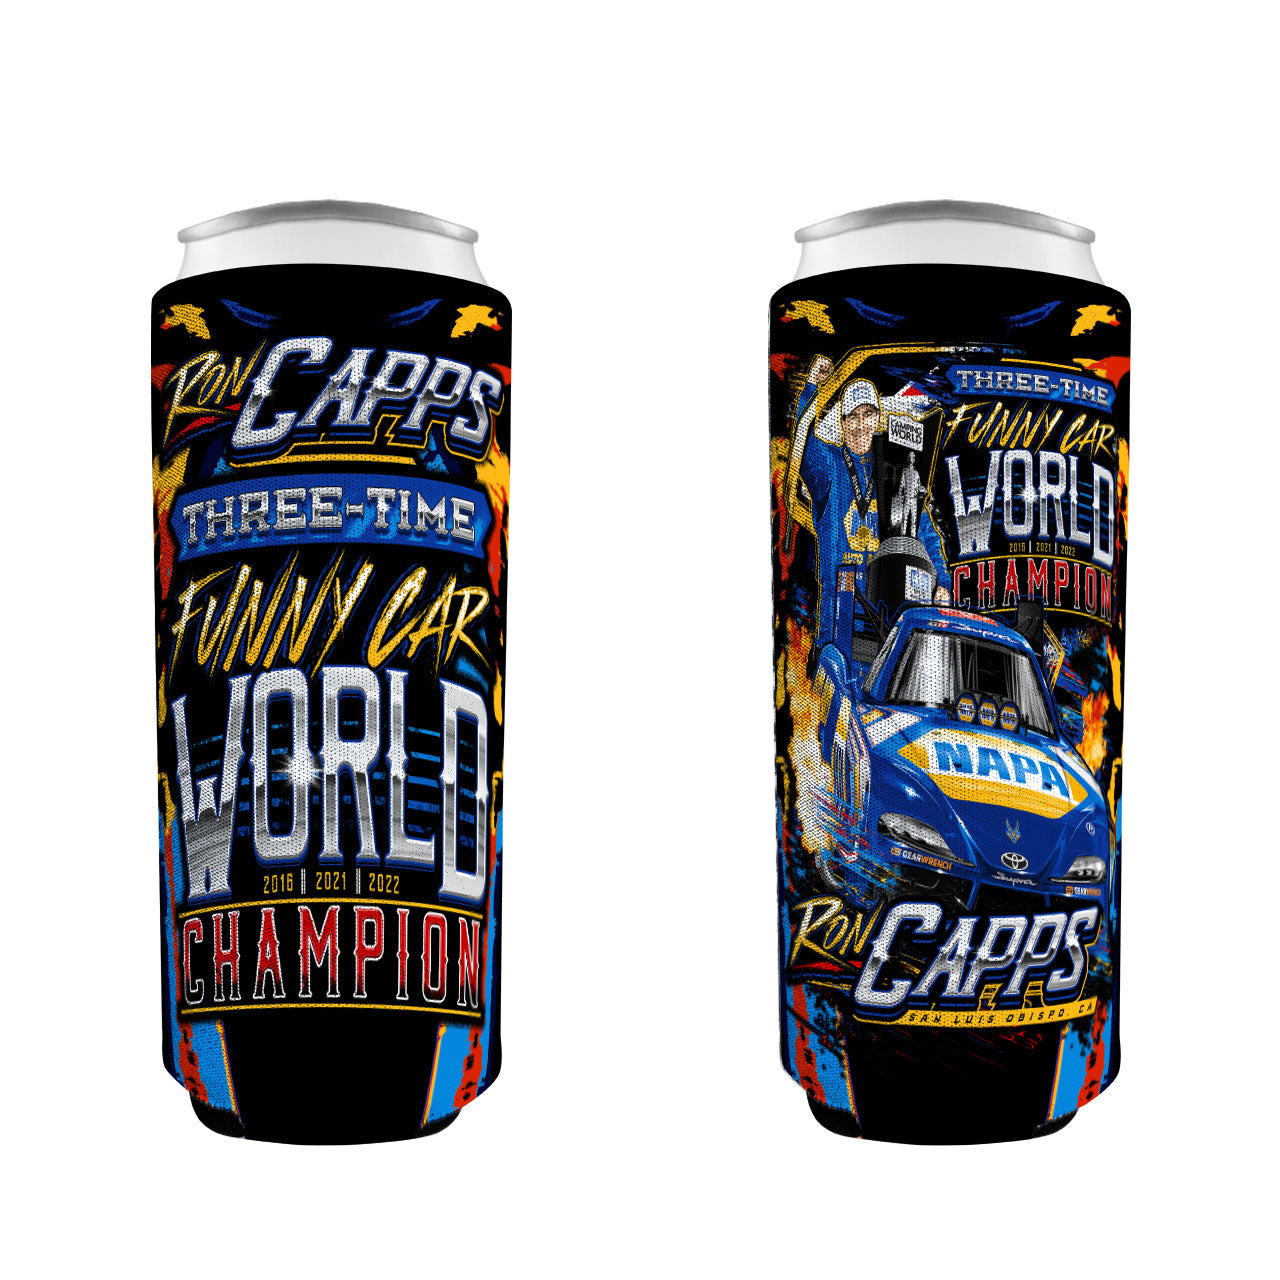 Ron Capps 3x Championship Coozie - Slim